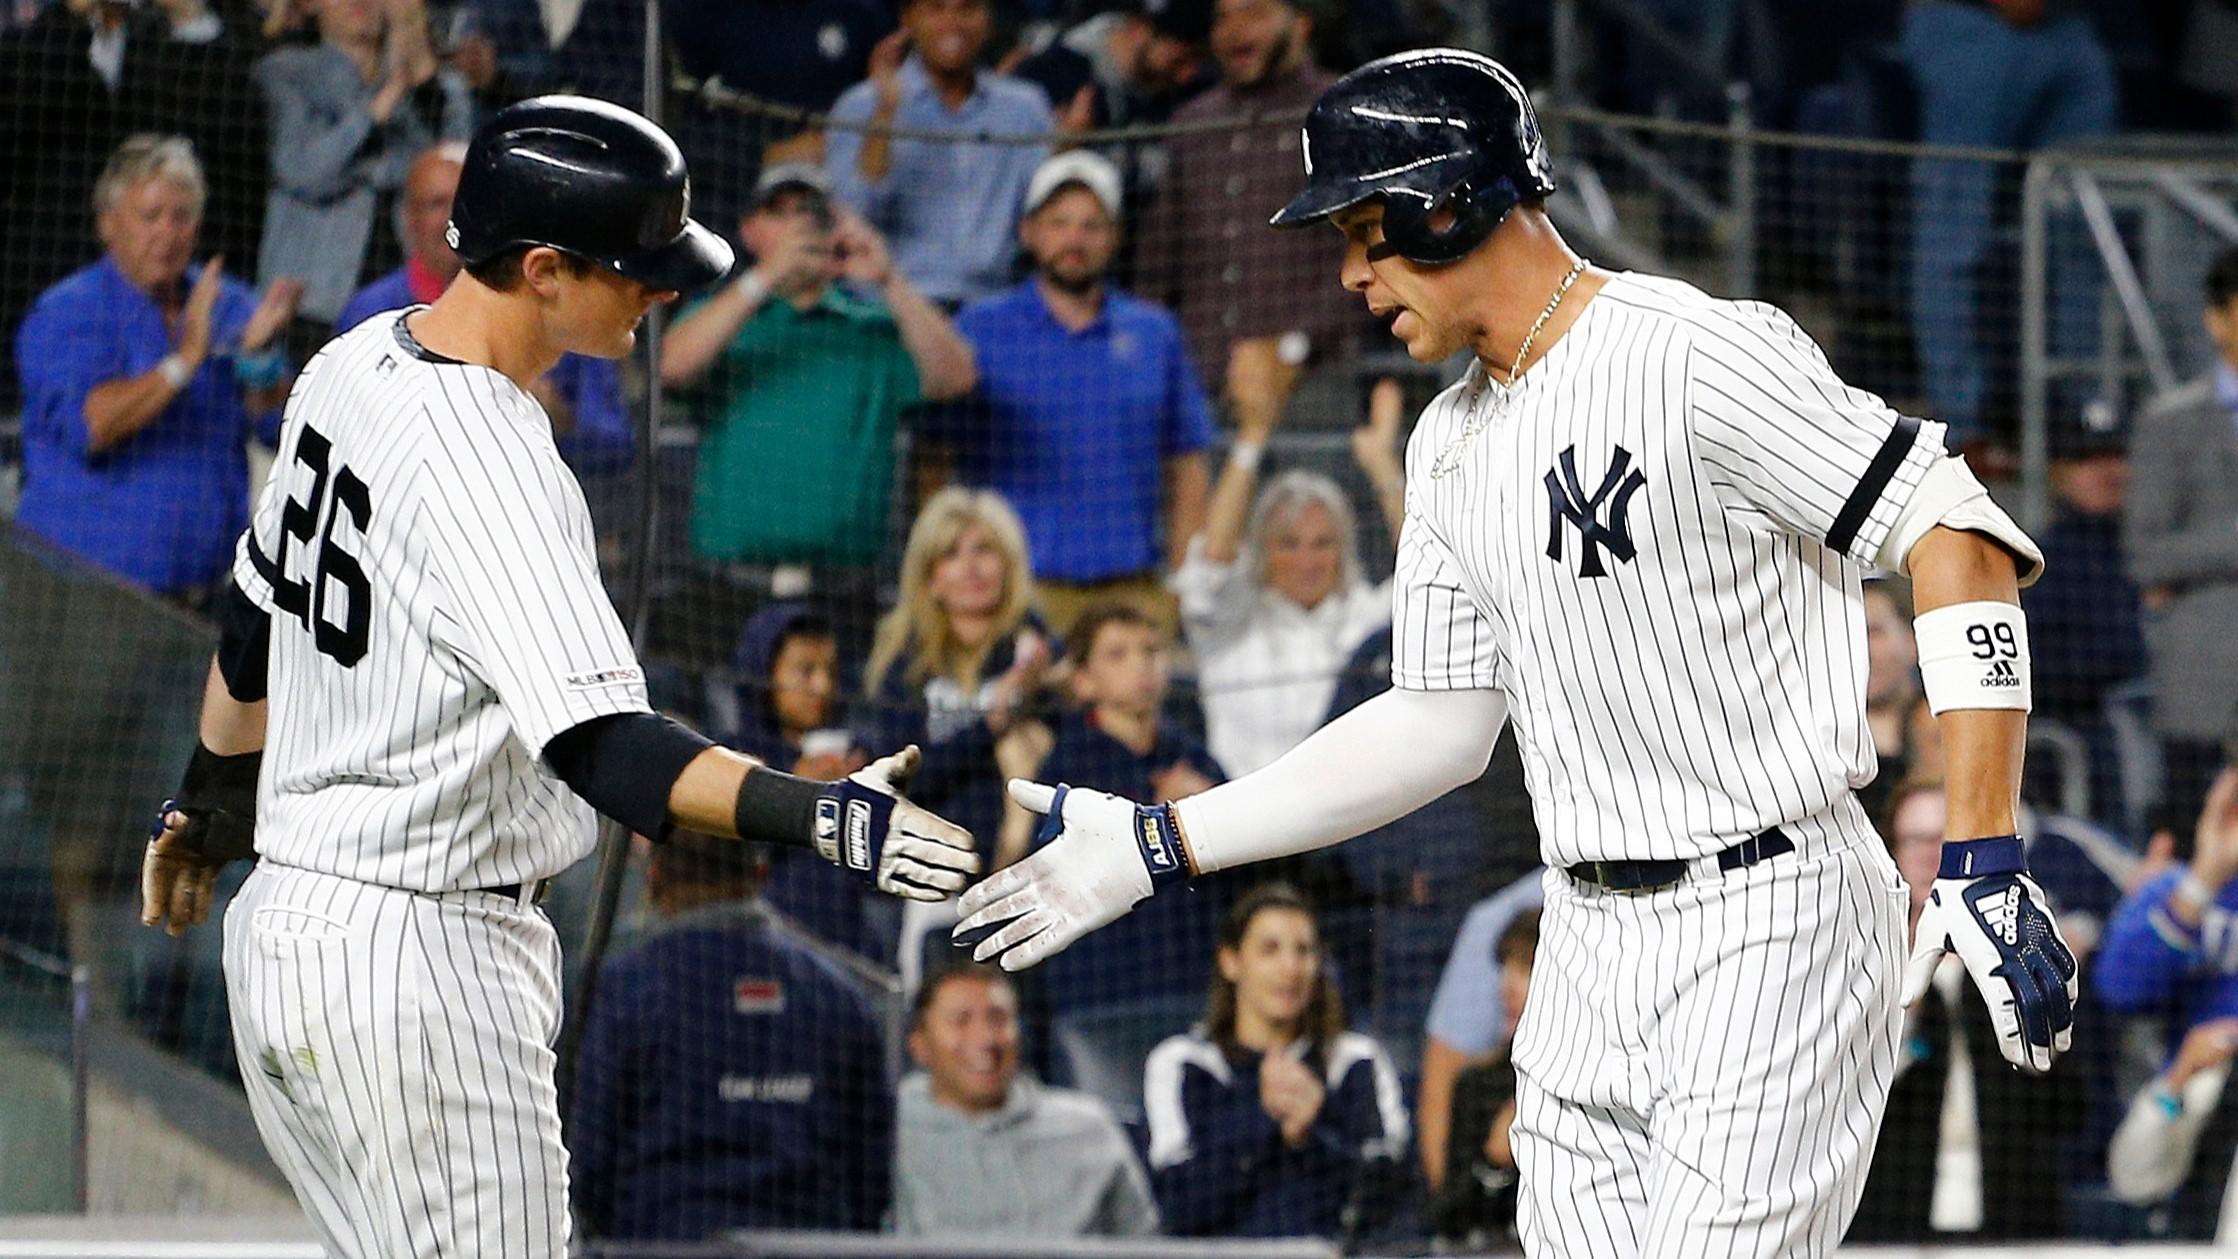 Sep 18, 2019; Bronx, NY, USA; New York Yankees right fielder Aaron Judge (99) is congratulated by second baseman DJ LeMahieu (26) after hitting a two run home run against the Los Angeles Angels during the third inning at Yankee Stadium. Mandatory Credit: Andy Marlin-USA TODAY Sports / Andy Marlin-USA TODAY Sports